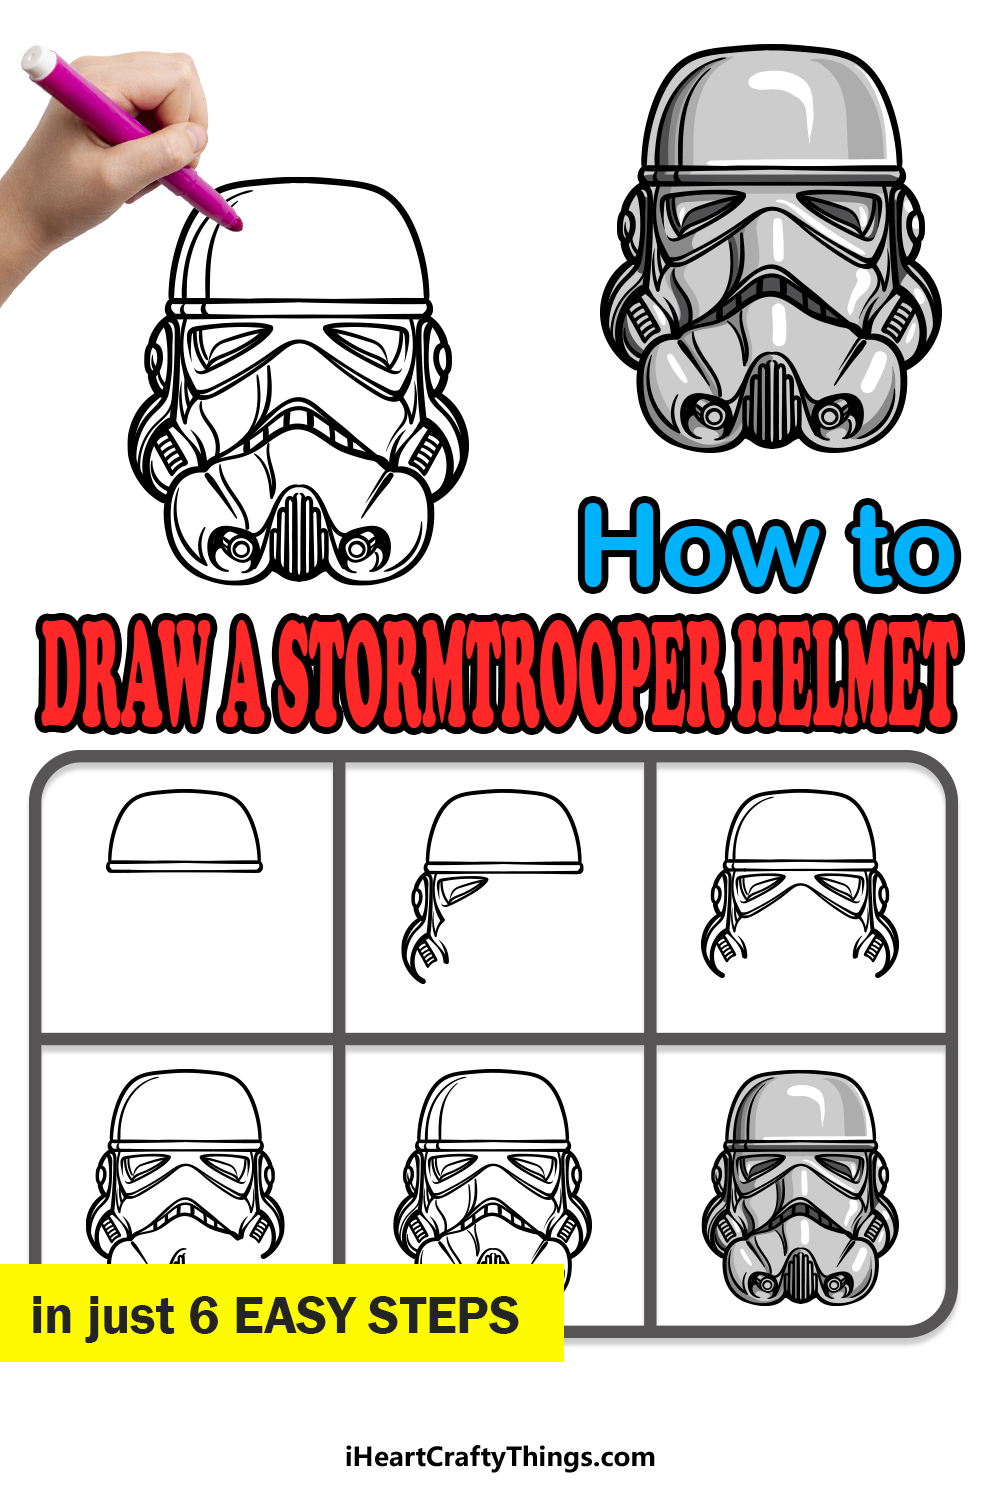 how to draw a Stormtrooper Helmet in 6 easy steps